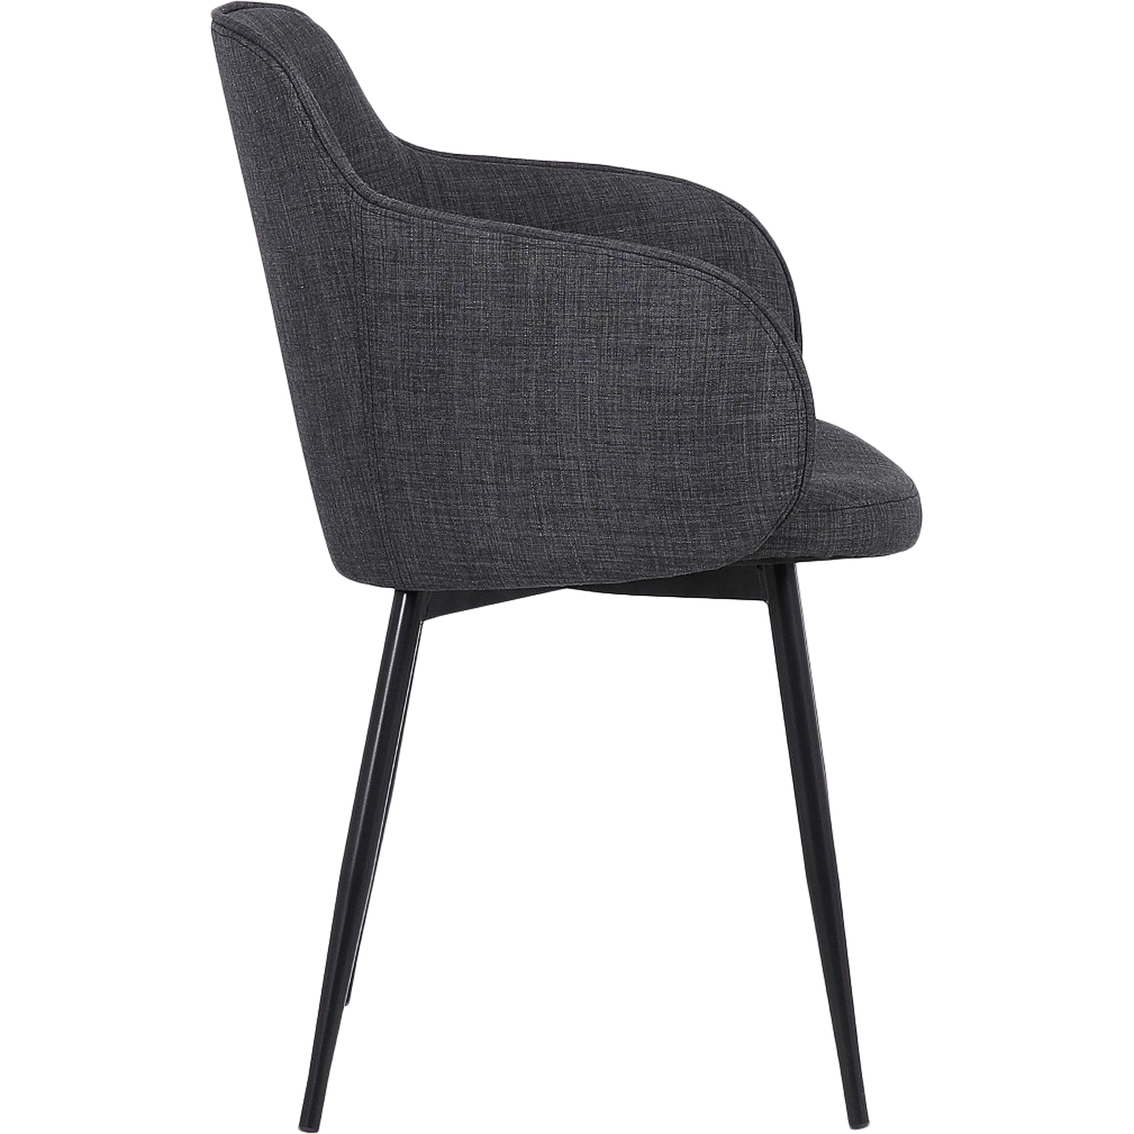 Armen Living Tammy Dining Chair - Image 3 of 5